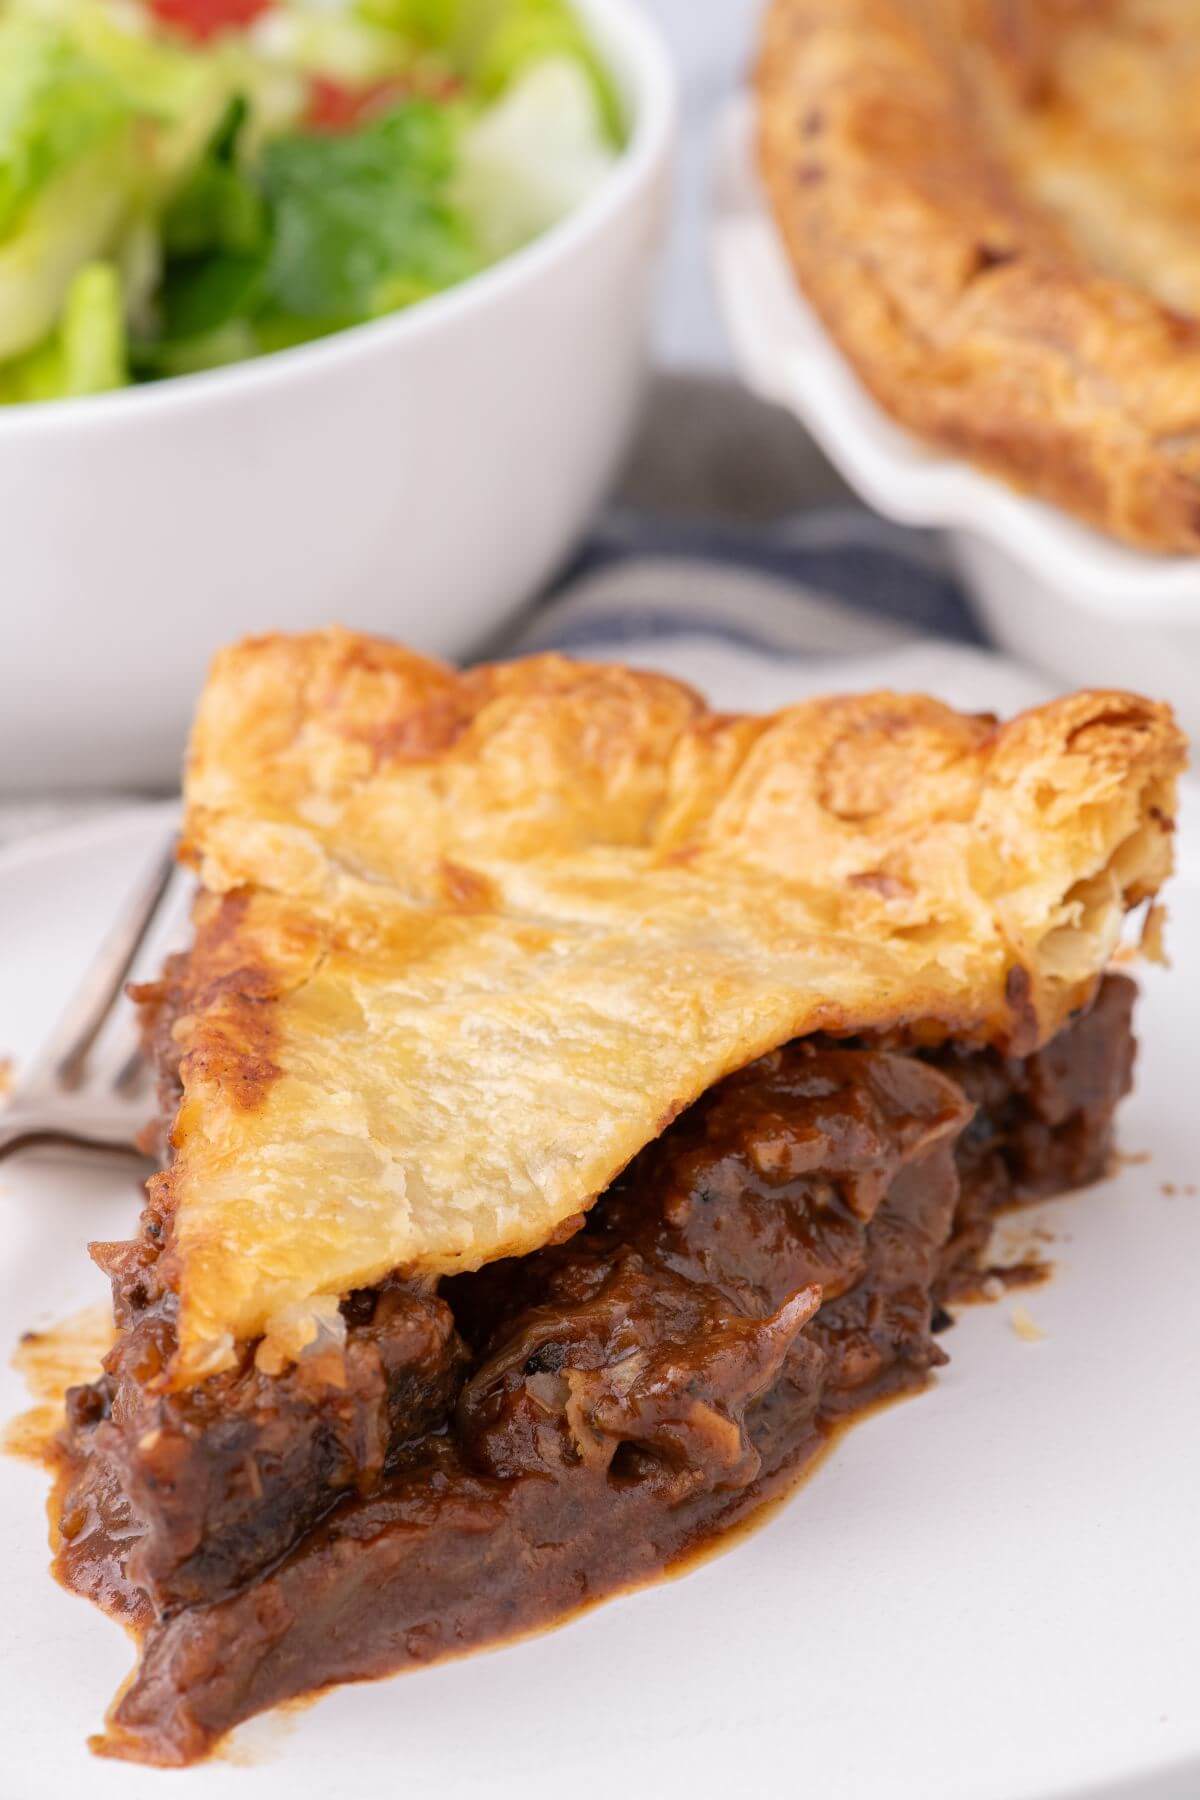 A piece of Irish steak pie shows a thick, hearty filling of steak in a rich ale gravy.